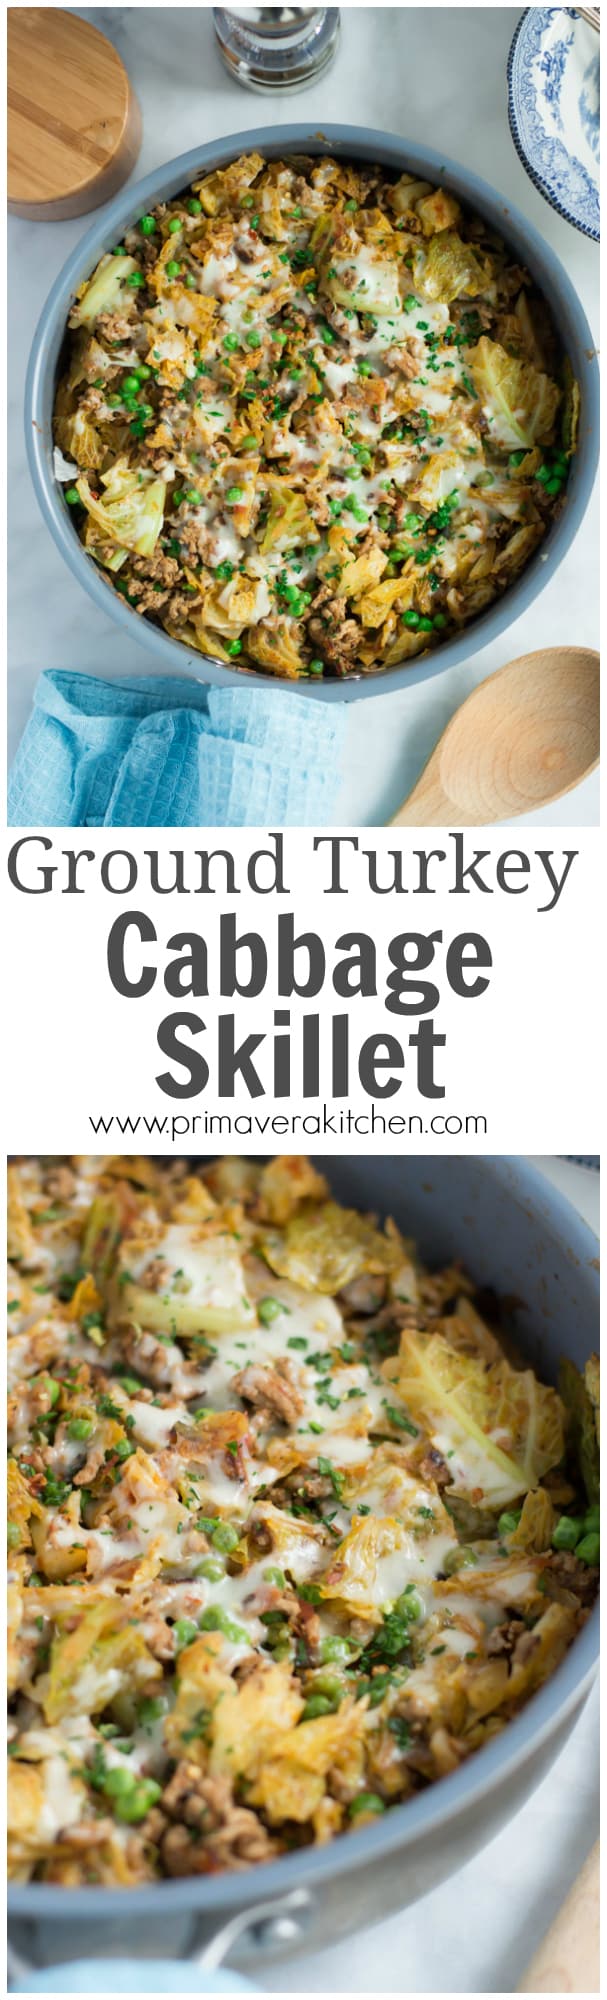 Ground Turkey Cabbage Skillet - This very easy Ground Turkey Cabbage Skillet recipe is perfect for a quick dinner during the week cause it takes less than 30mins to be ready! It is also gluten-free and very flavourful. 